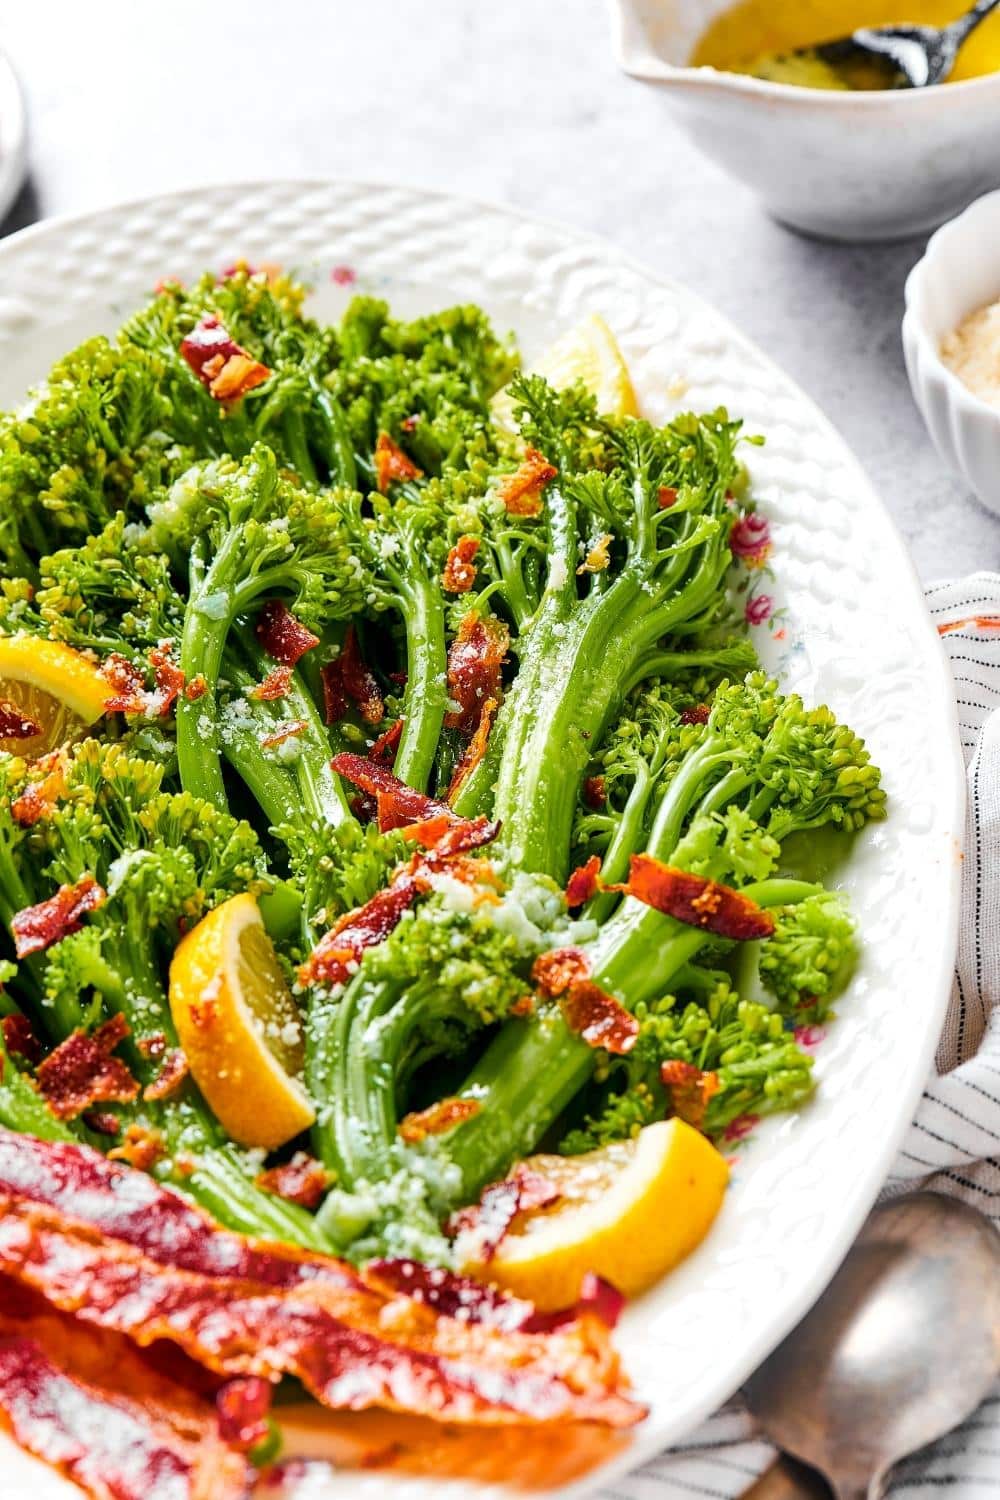 Slices of bacon, lemon wedges, and broccolini on a white plate.